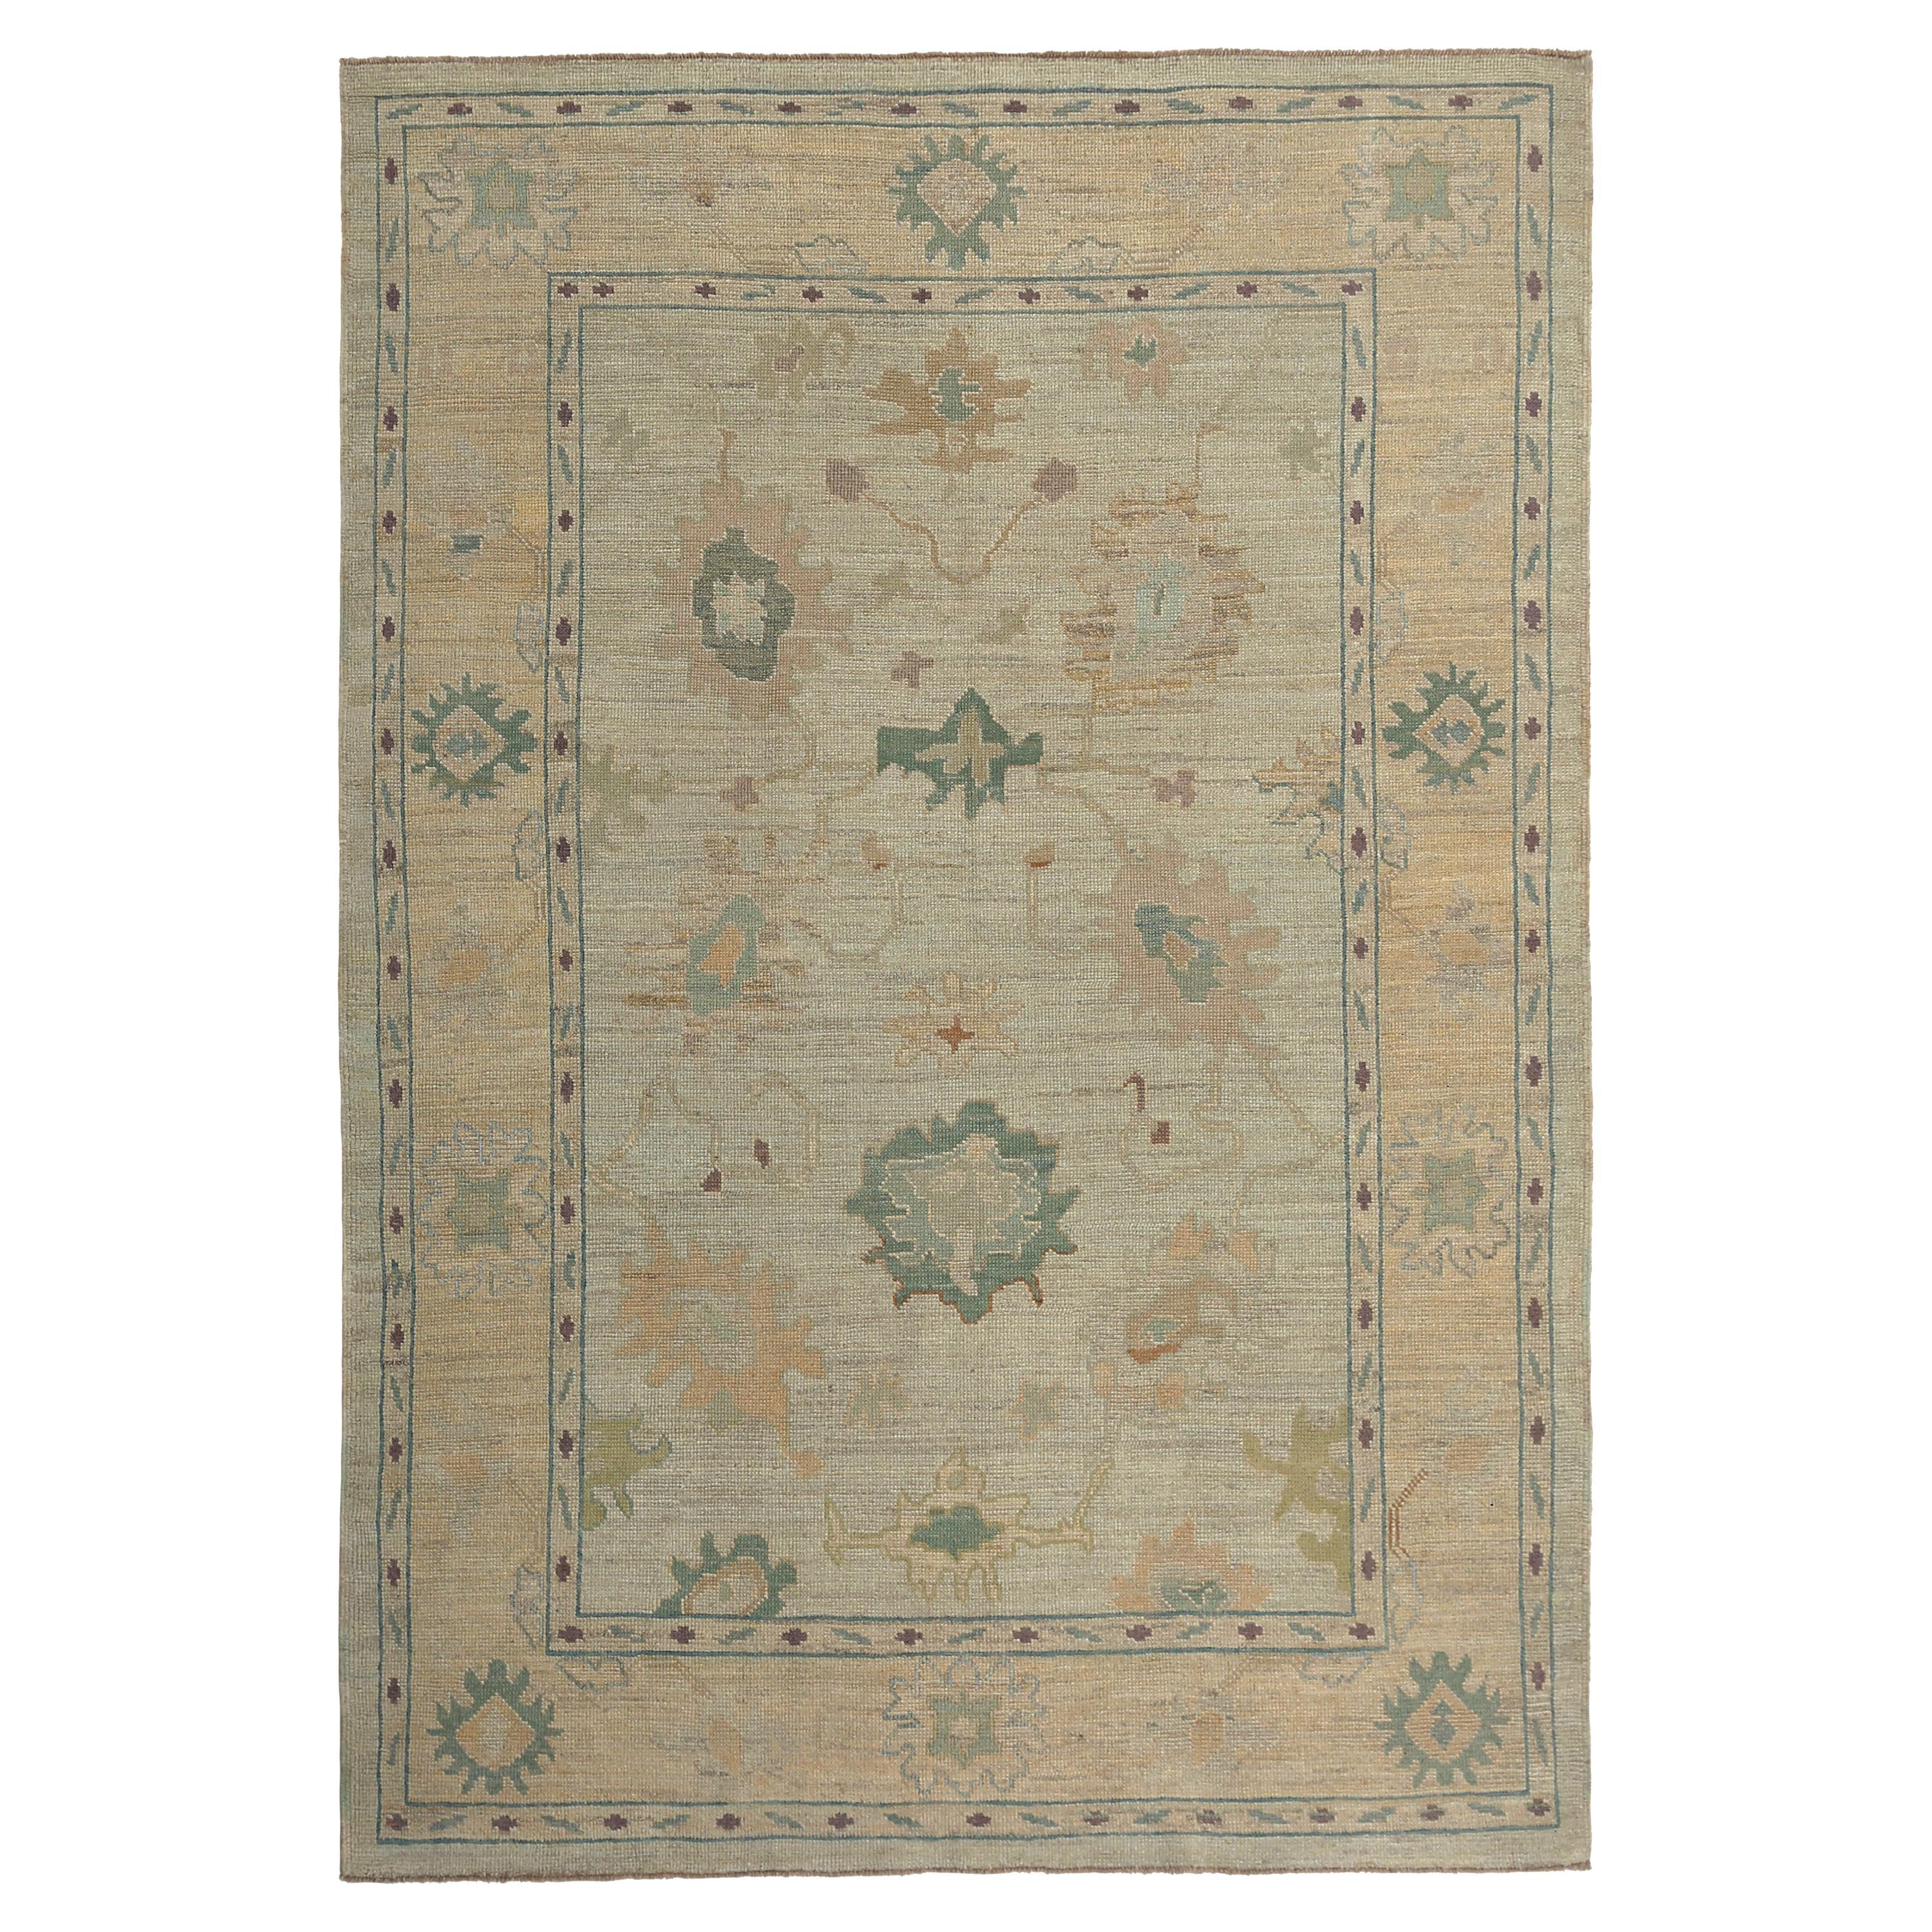 Handmade Turkish Oushak Rug with Bright Floral Motifs